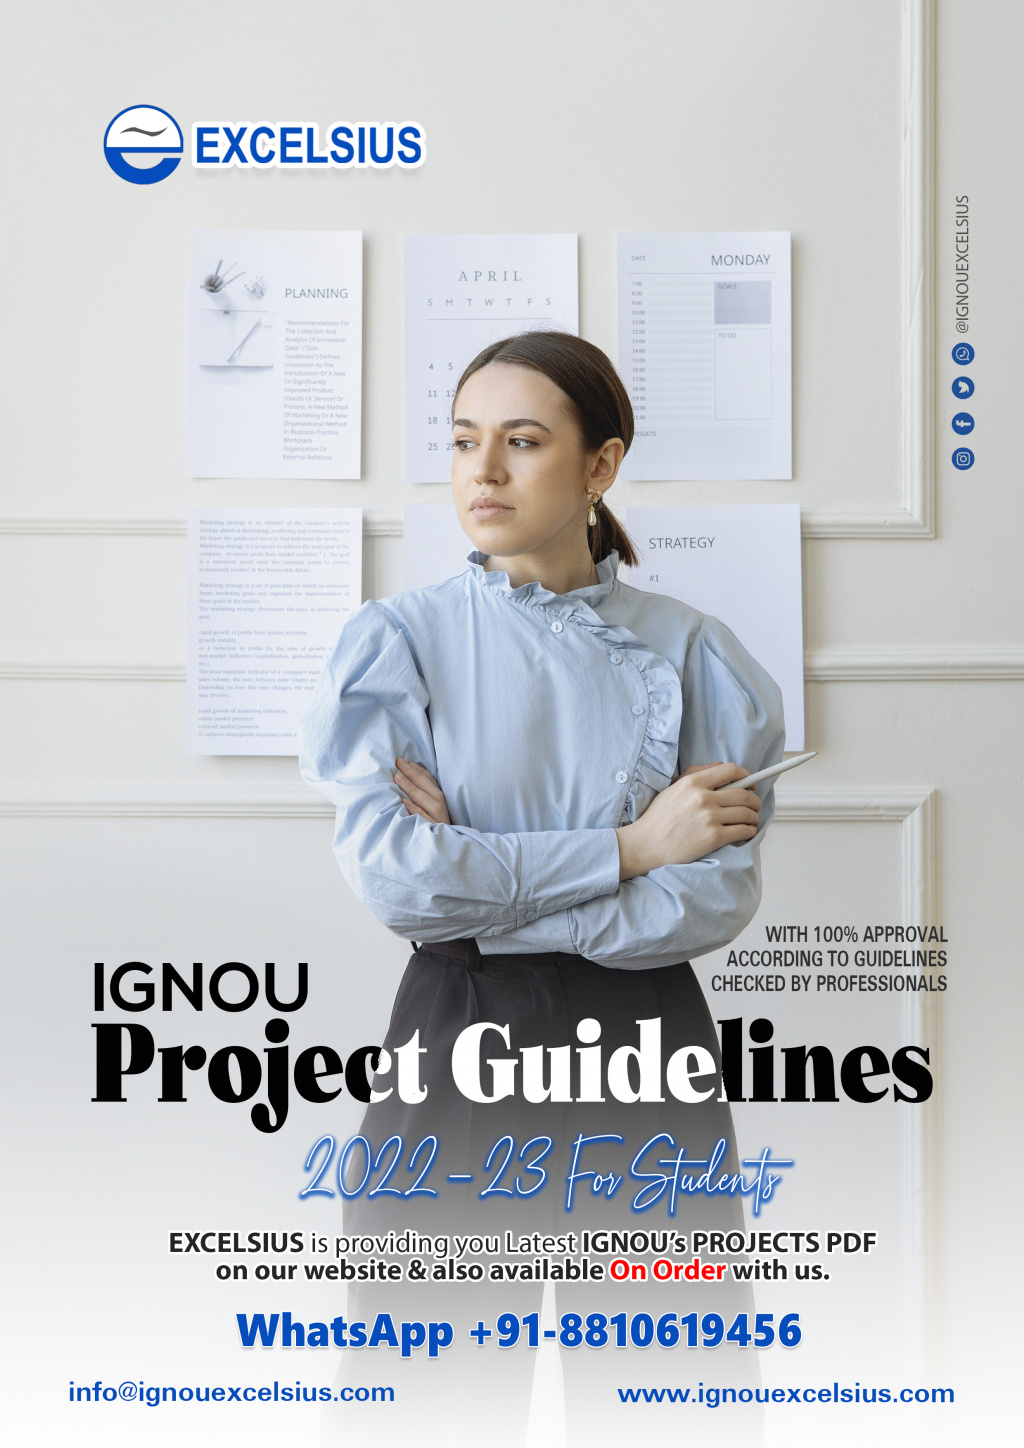 IGNOU Project Guidelines 2022-23